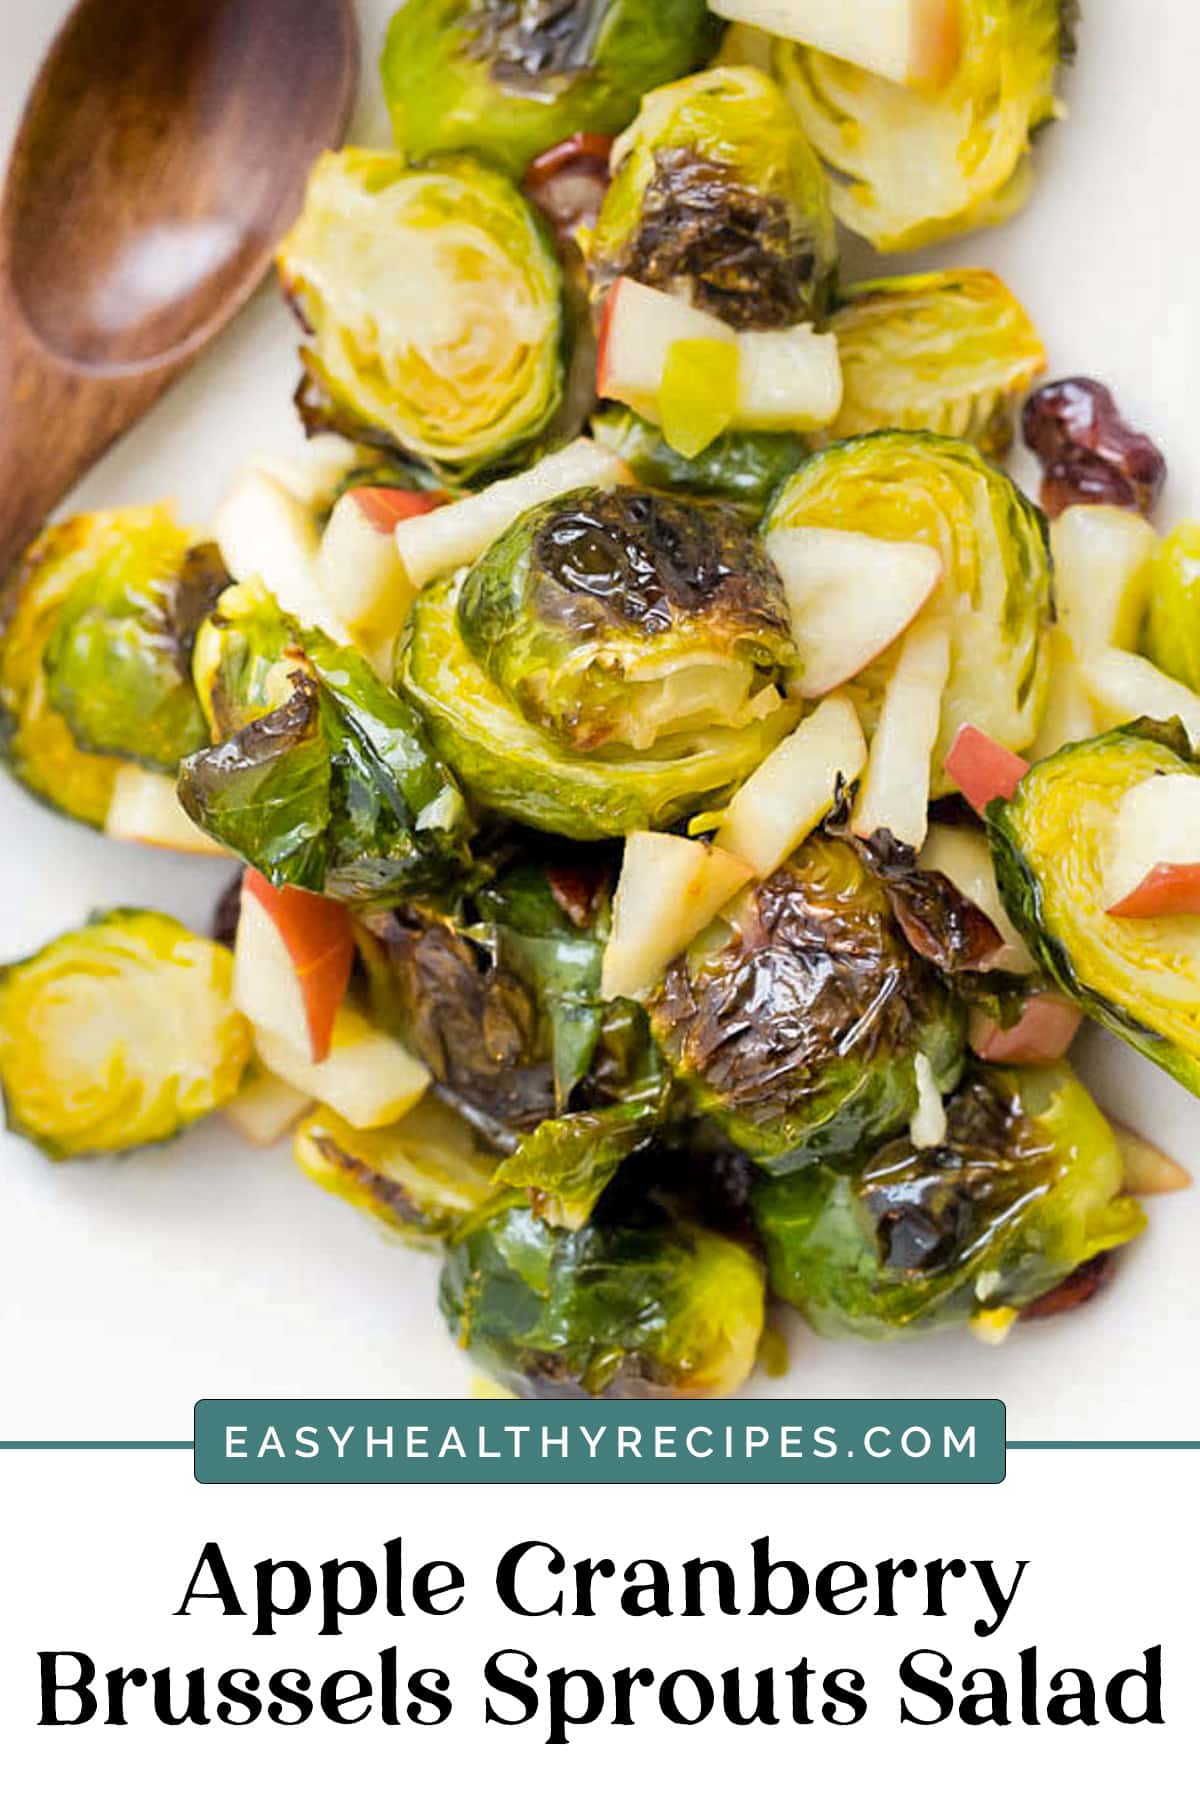 Graphic for brussels sprouts salad.